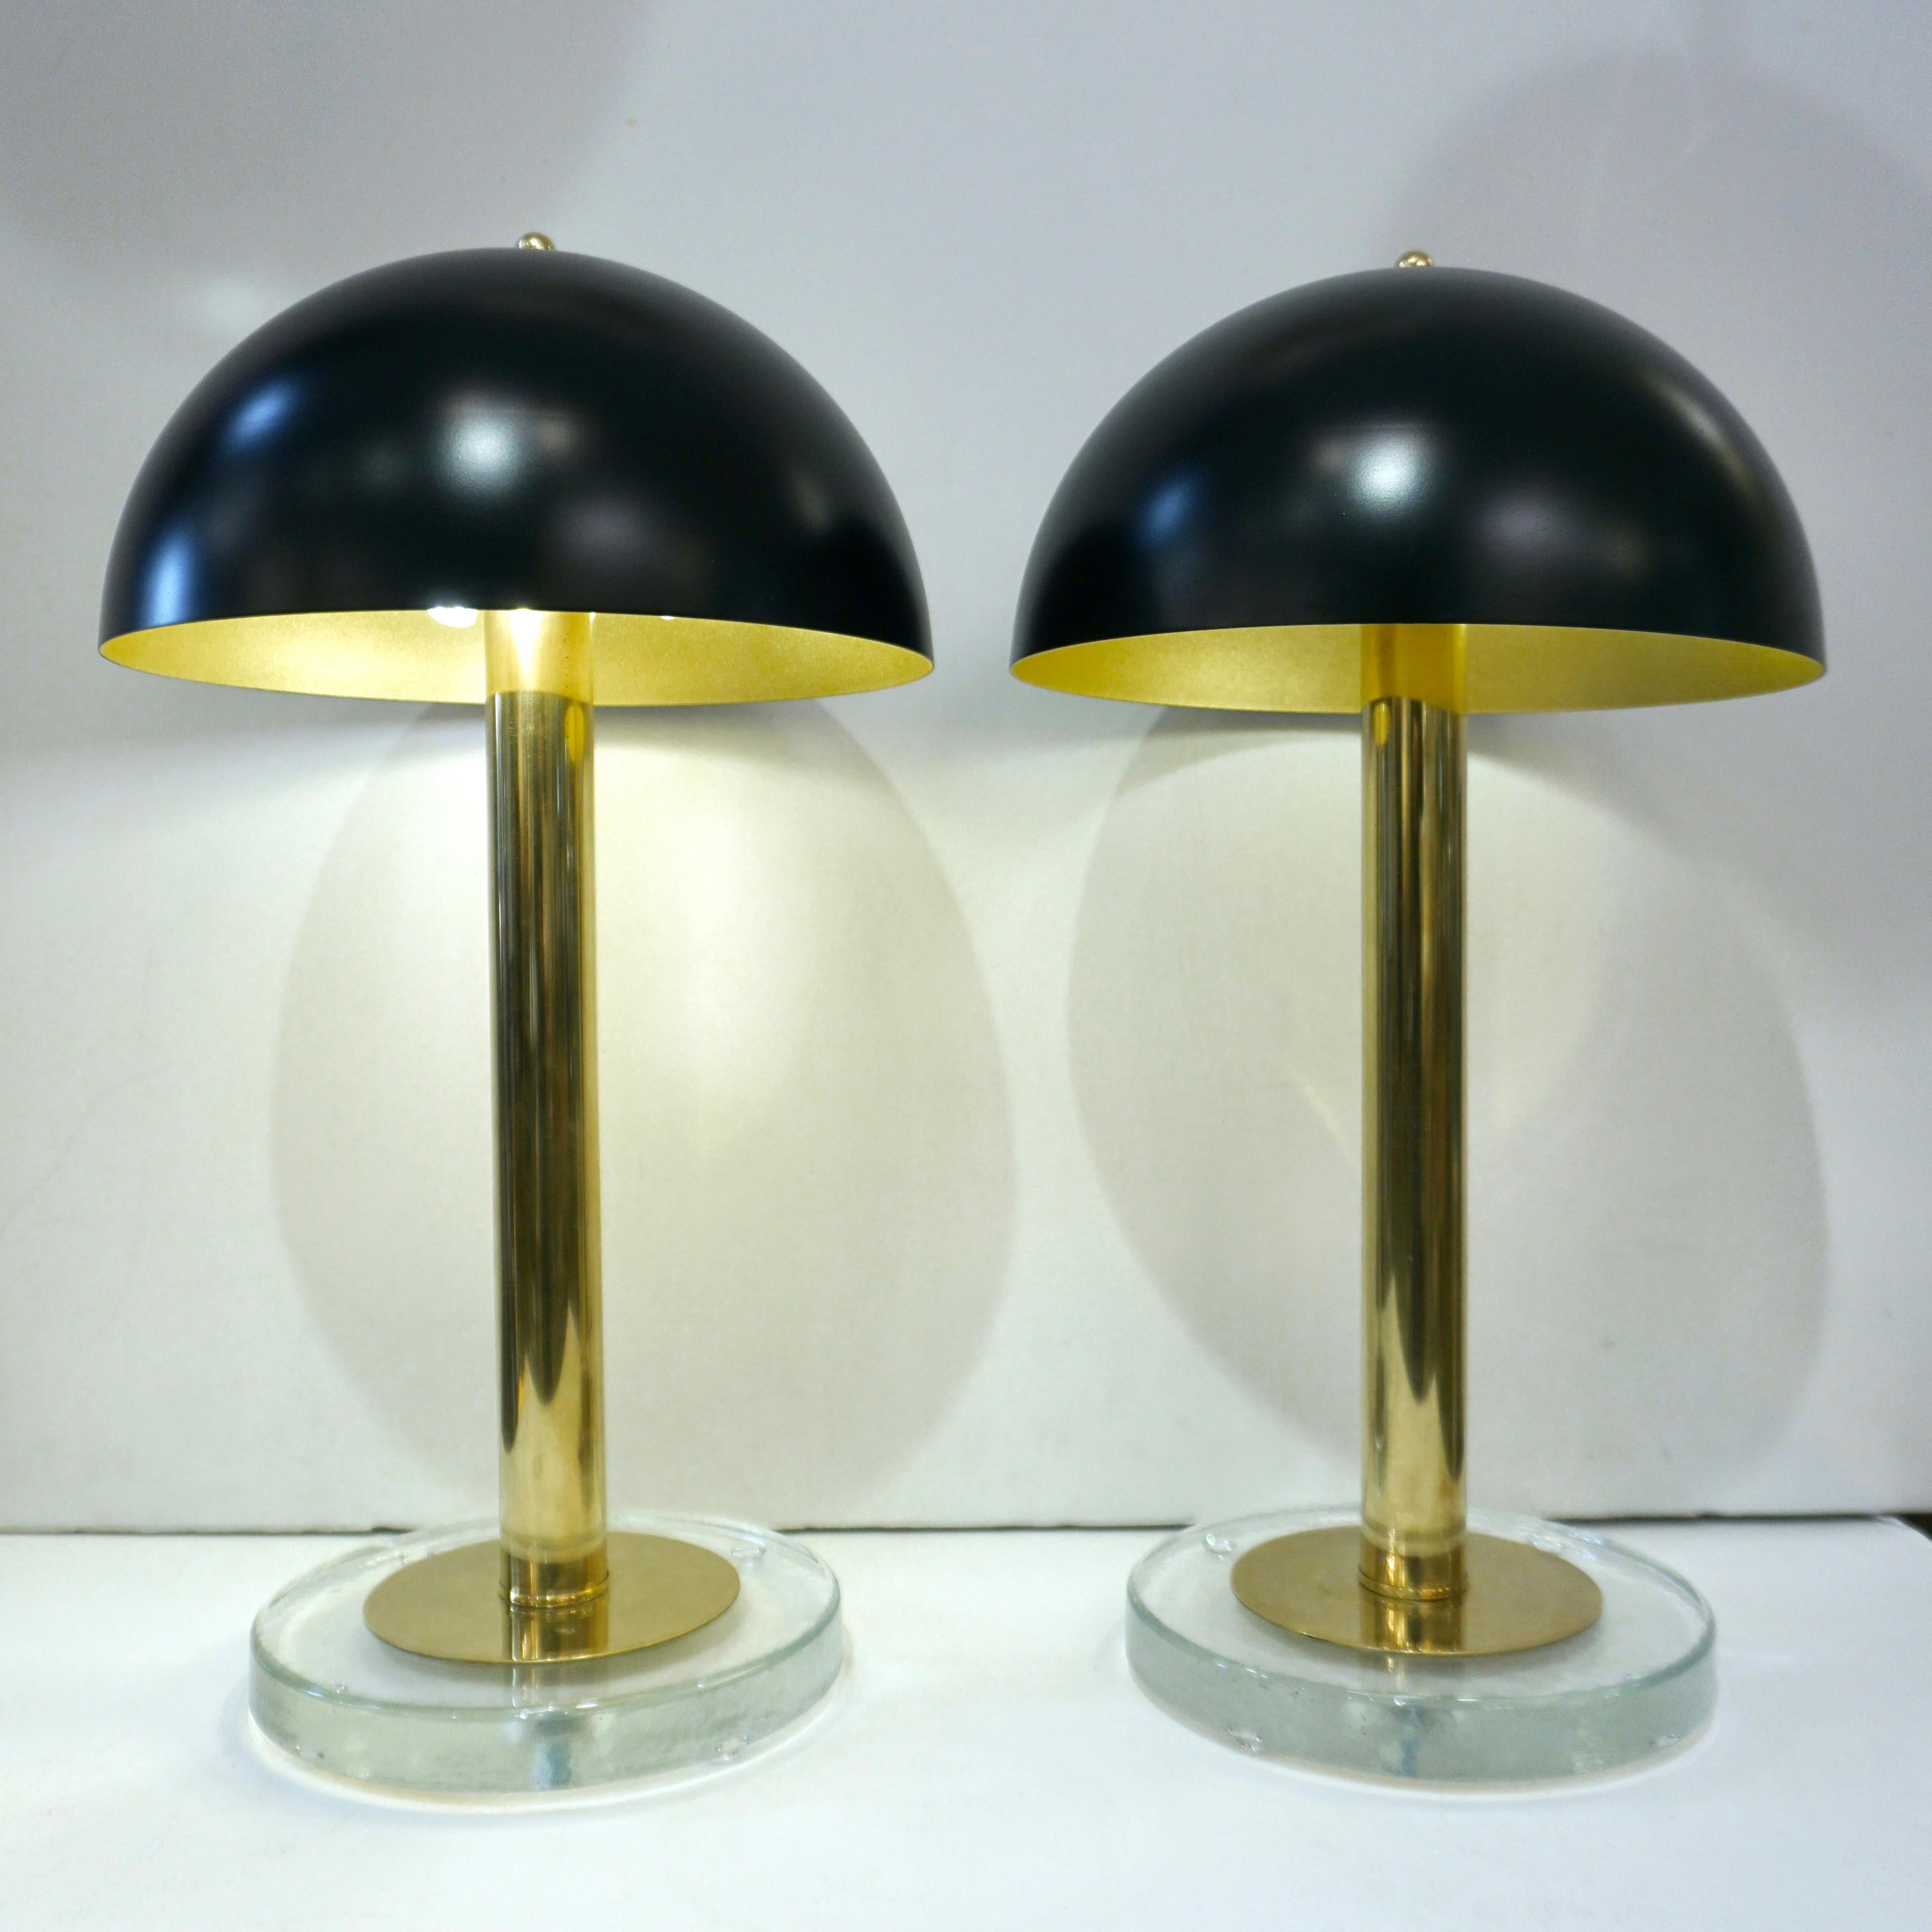 Lacquered Italian Modern Pair of Art Deco Design Black and Gold Lacquer Brass Dome Lamps